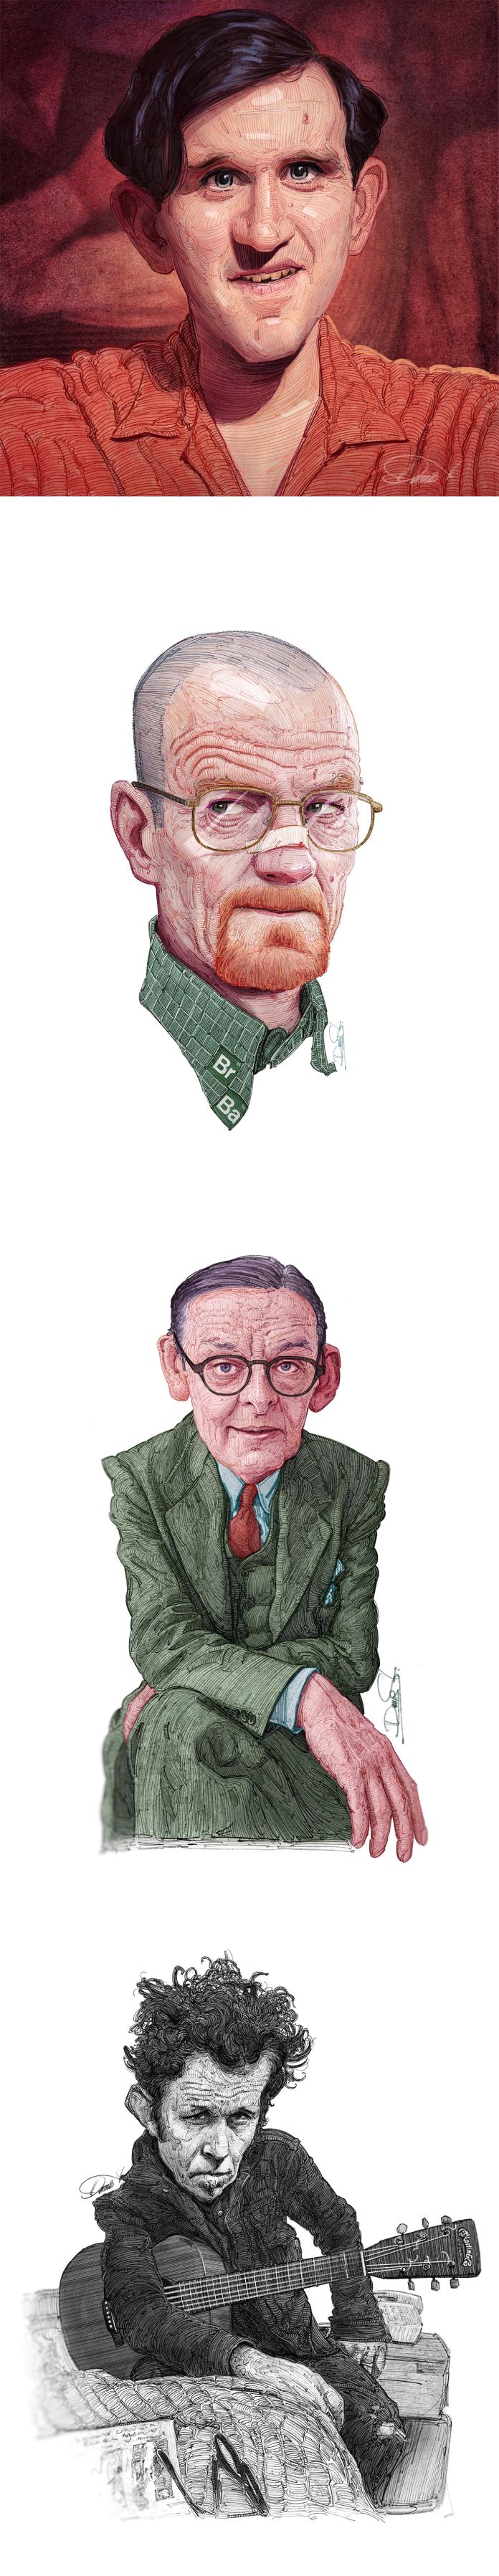 Famous people illustrations by Stavros Damos